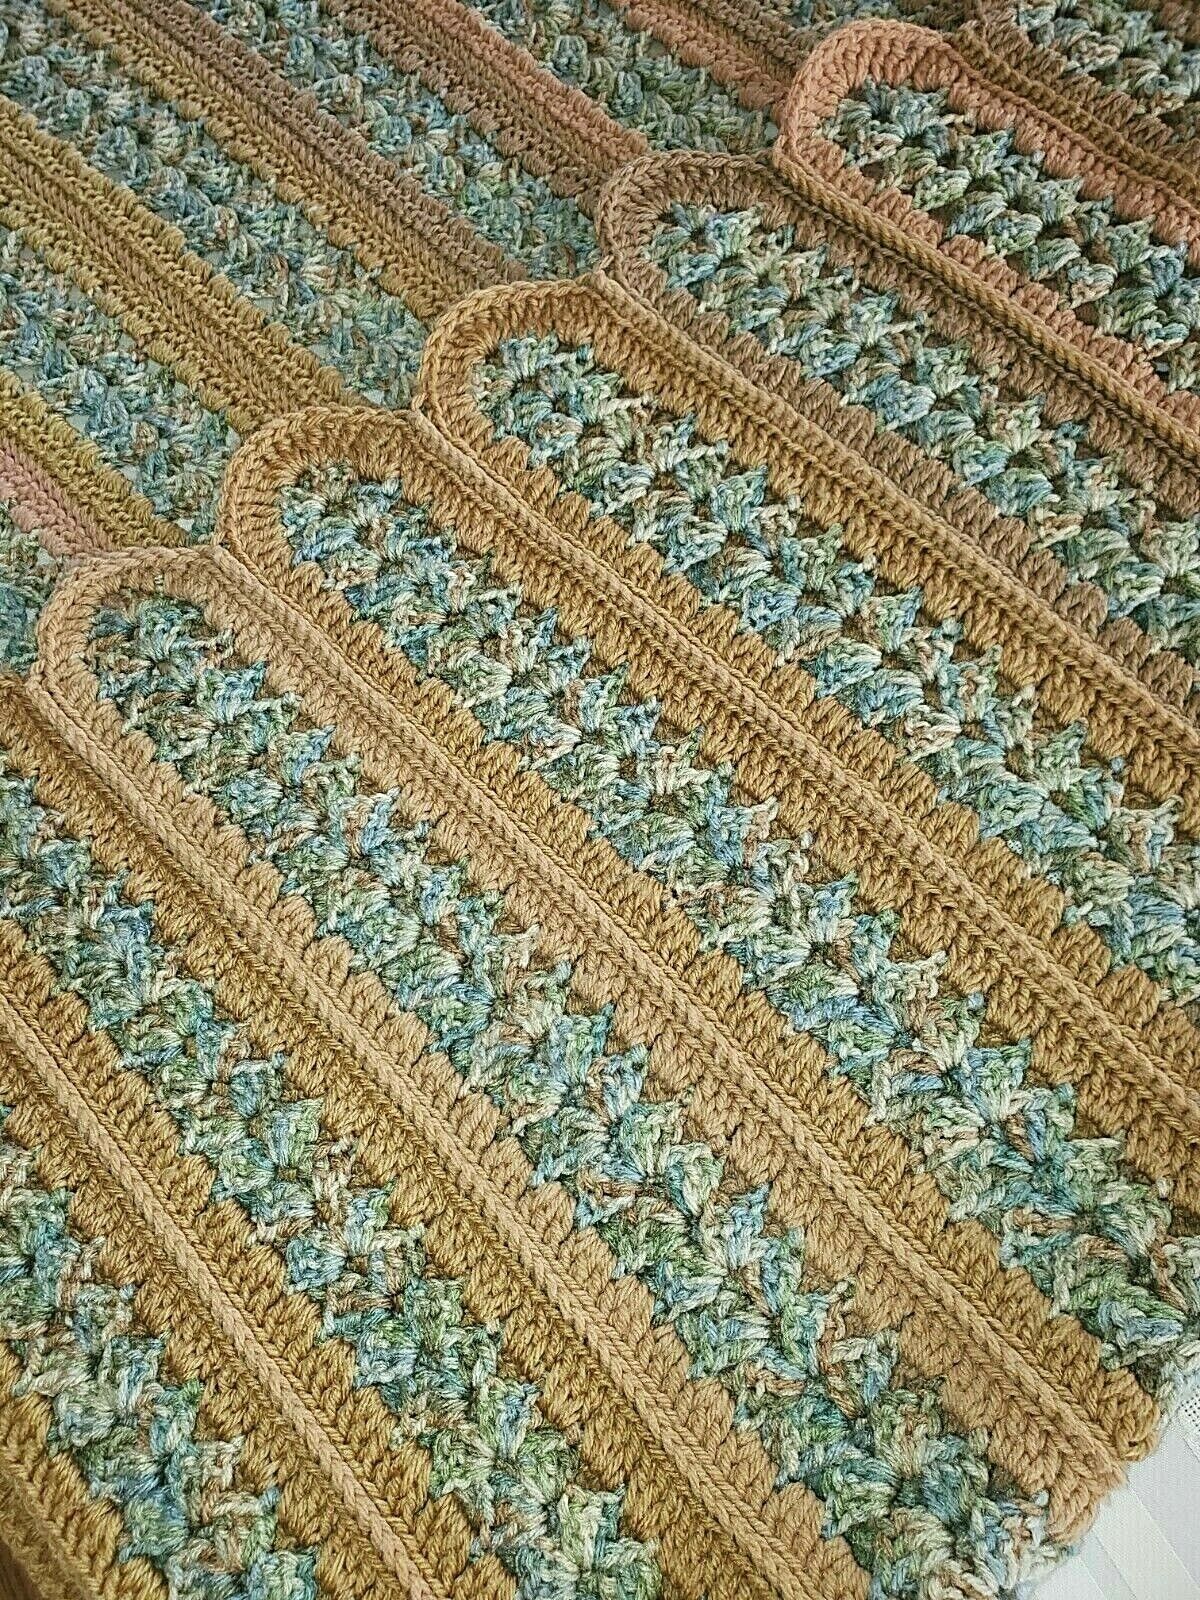 Crocheted List price Afghan Max 82% OFF